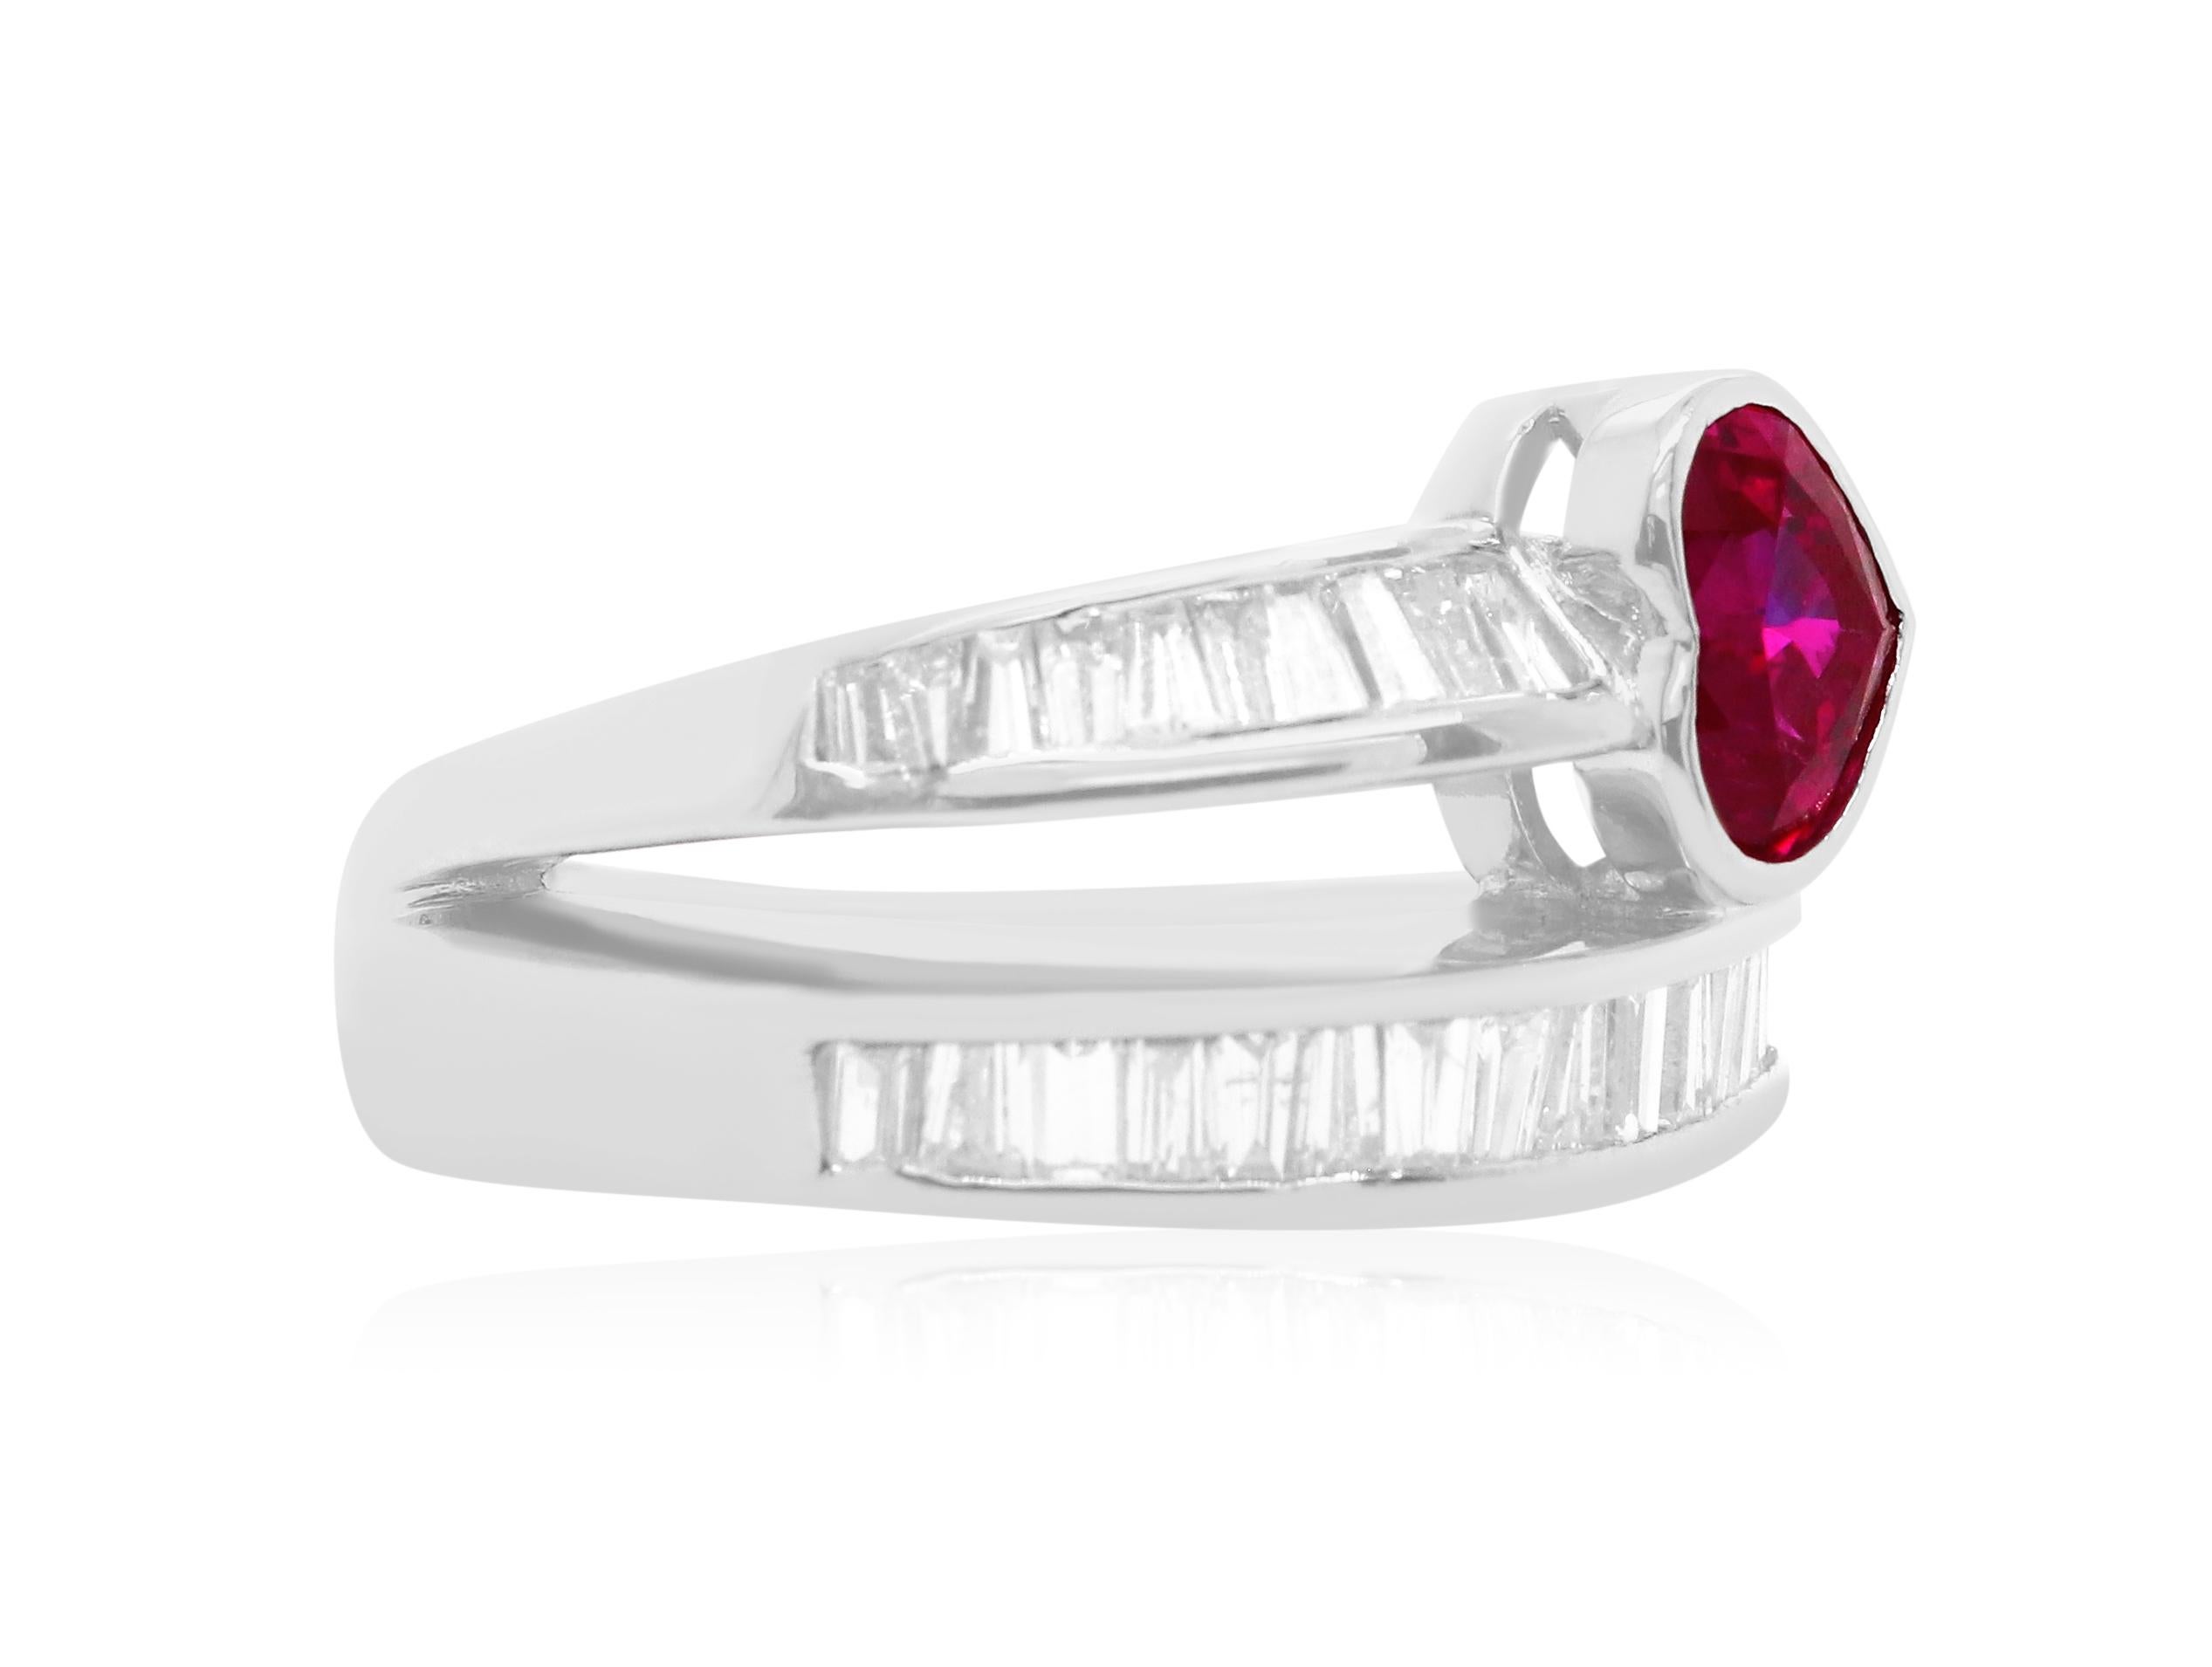 Material: Platinum
Center Stone Details: 1 Heart Shaped Ruby at Approximately 1.12 Carats
Mounting Diamond Details: 28 Brilliant Baguette Diamonds at 0.70 Carats - Clarity: SI / Color: H-I
Ring Size: 6. Complimentary sizing on all Alberto